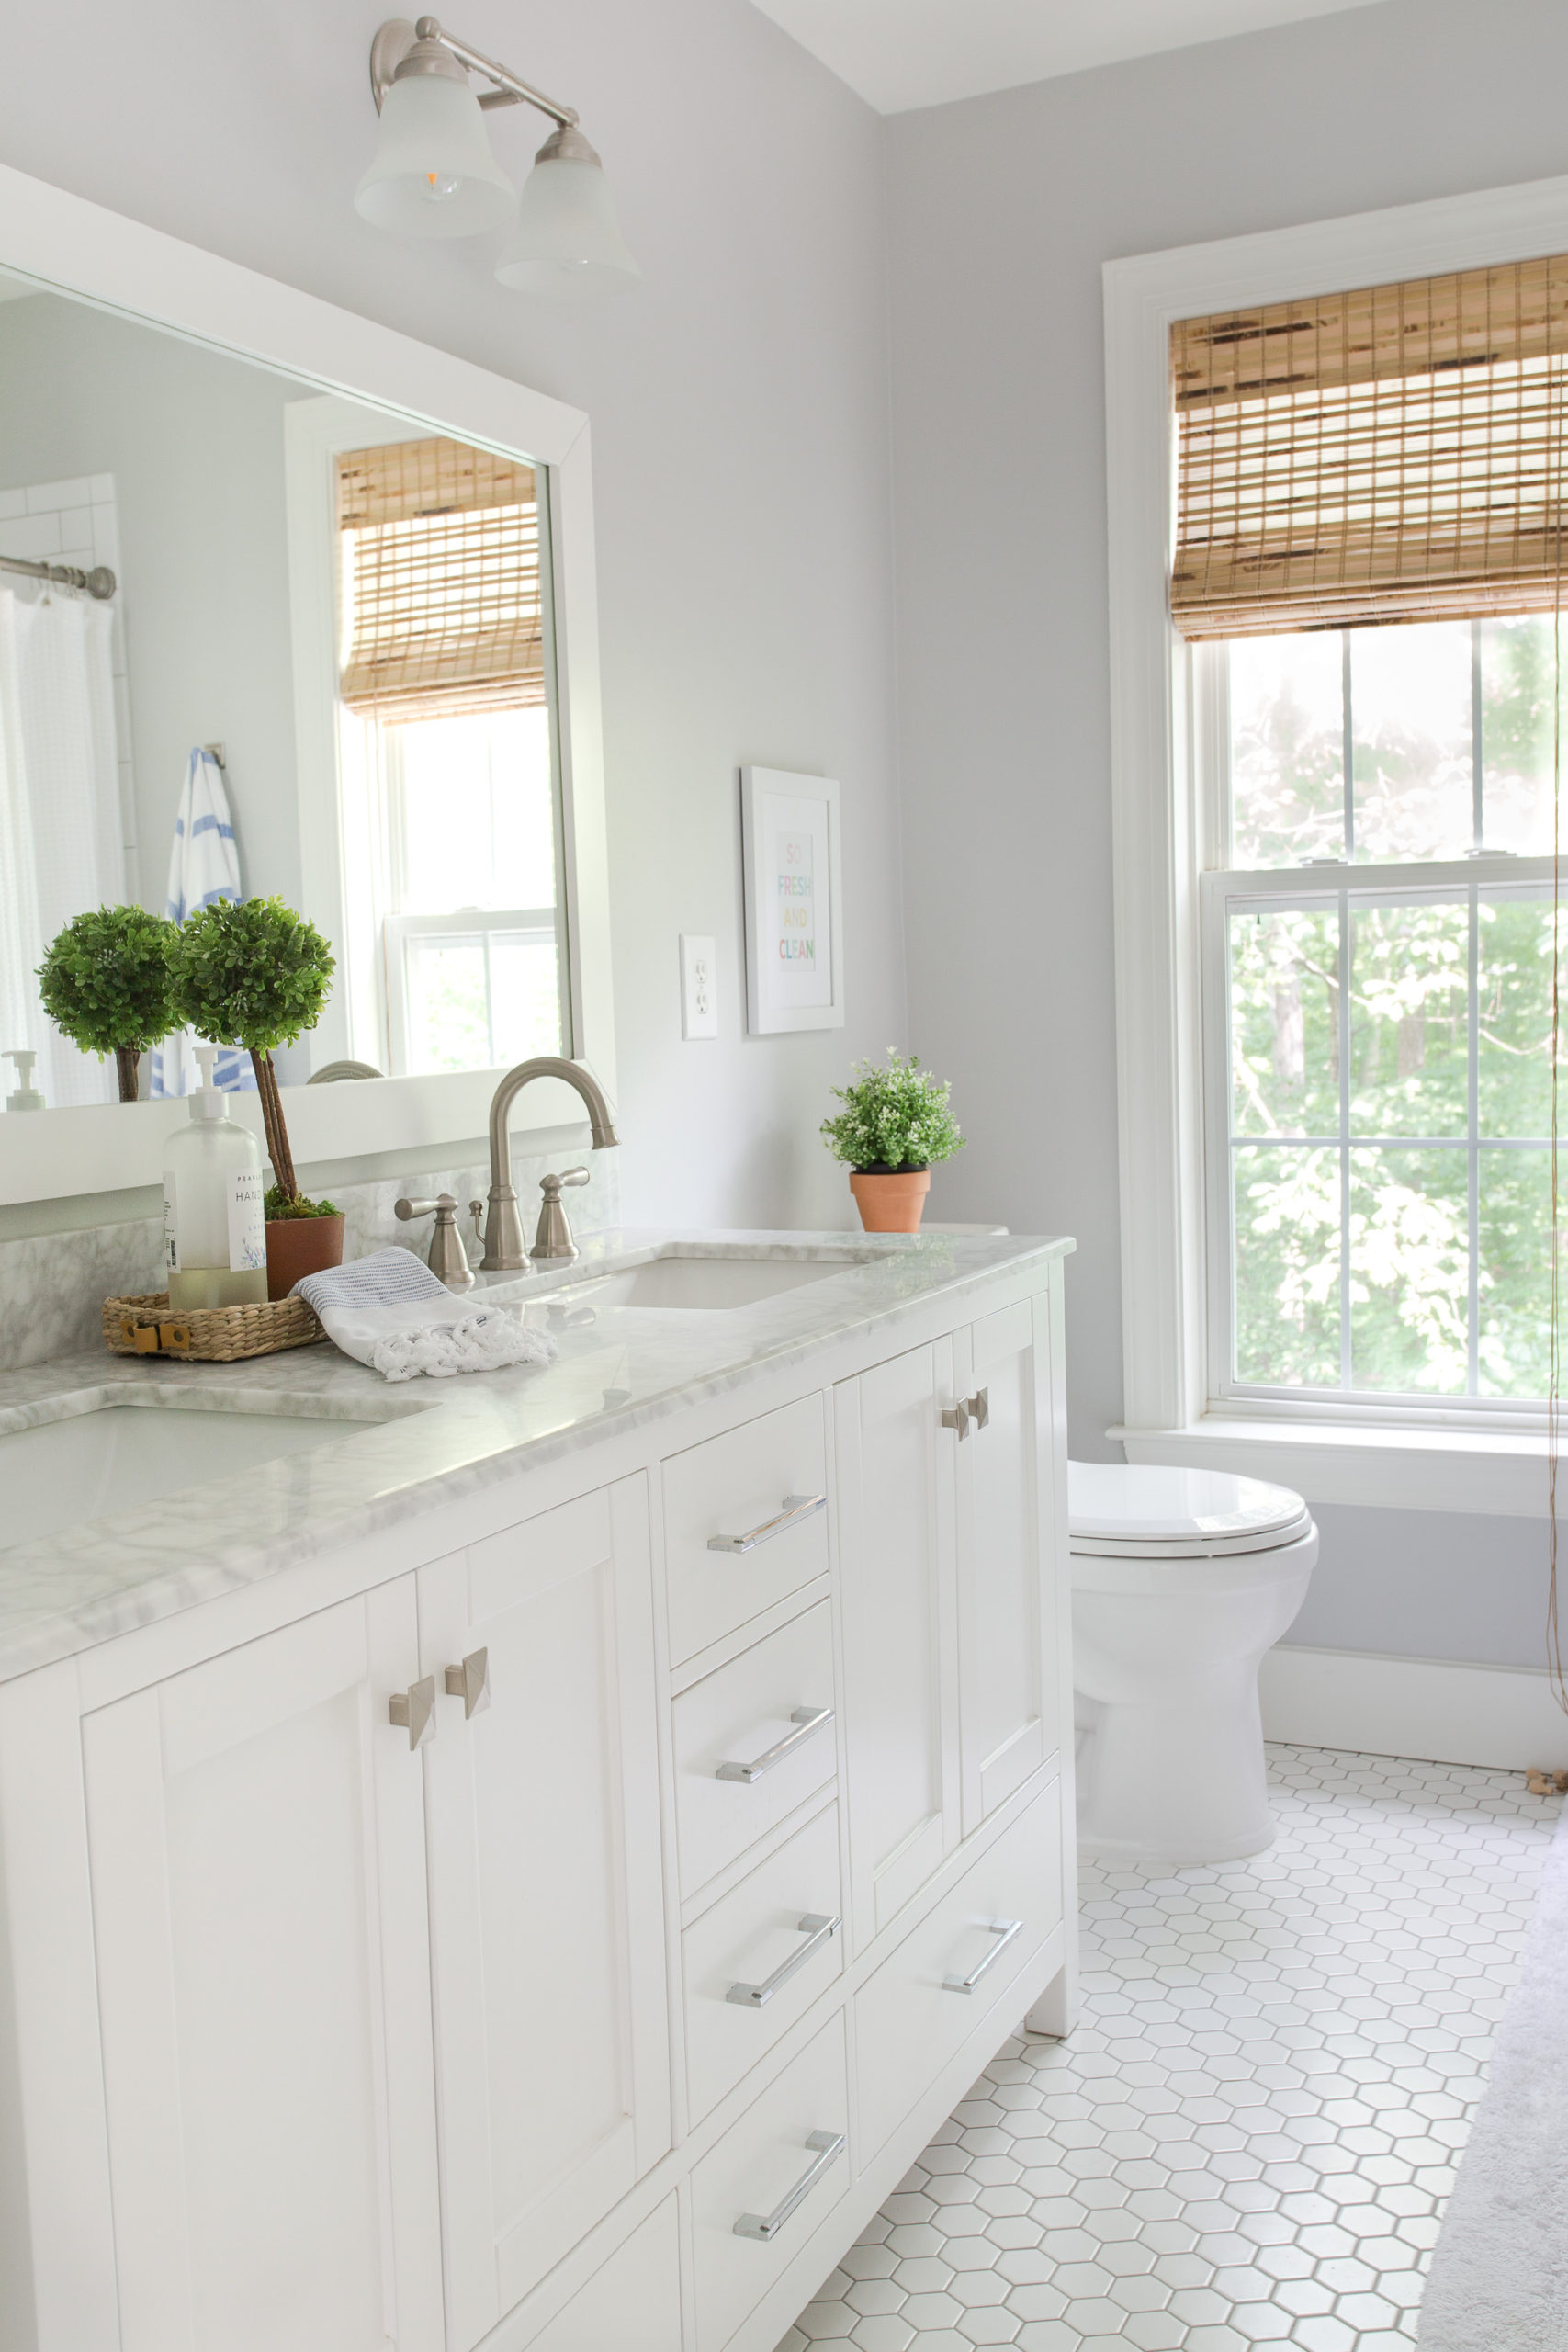 White bathroom with gray walls with a green potted topiary on bathroom cabinet overlooking window